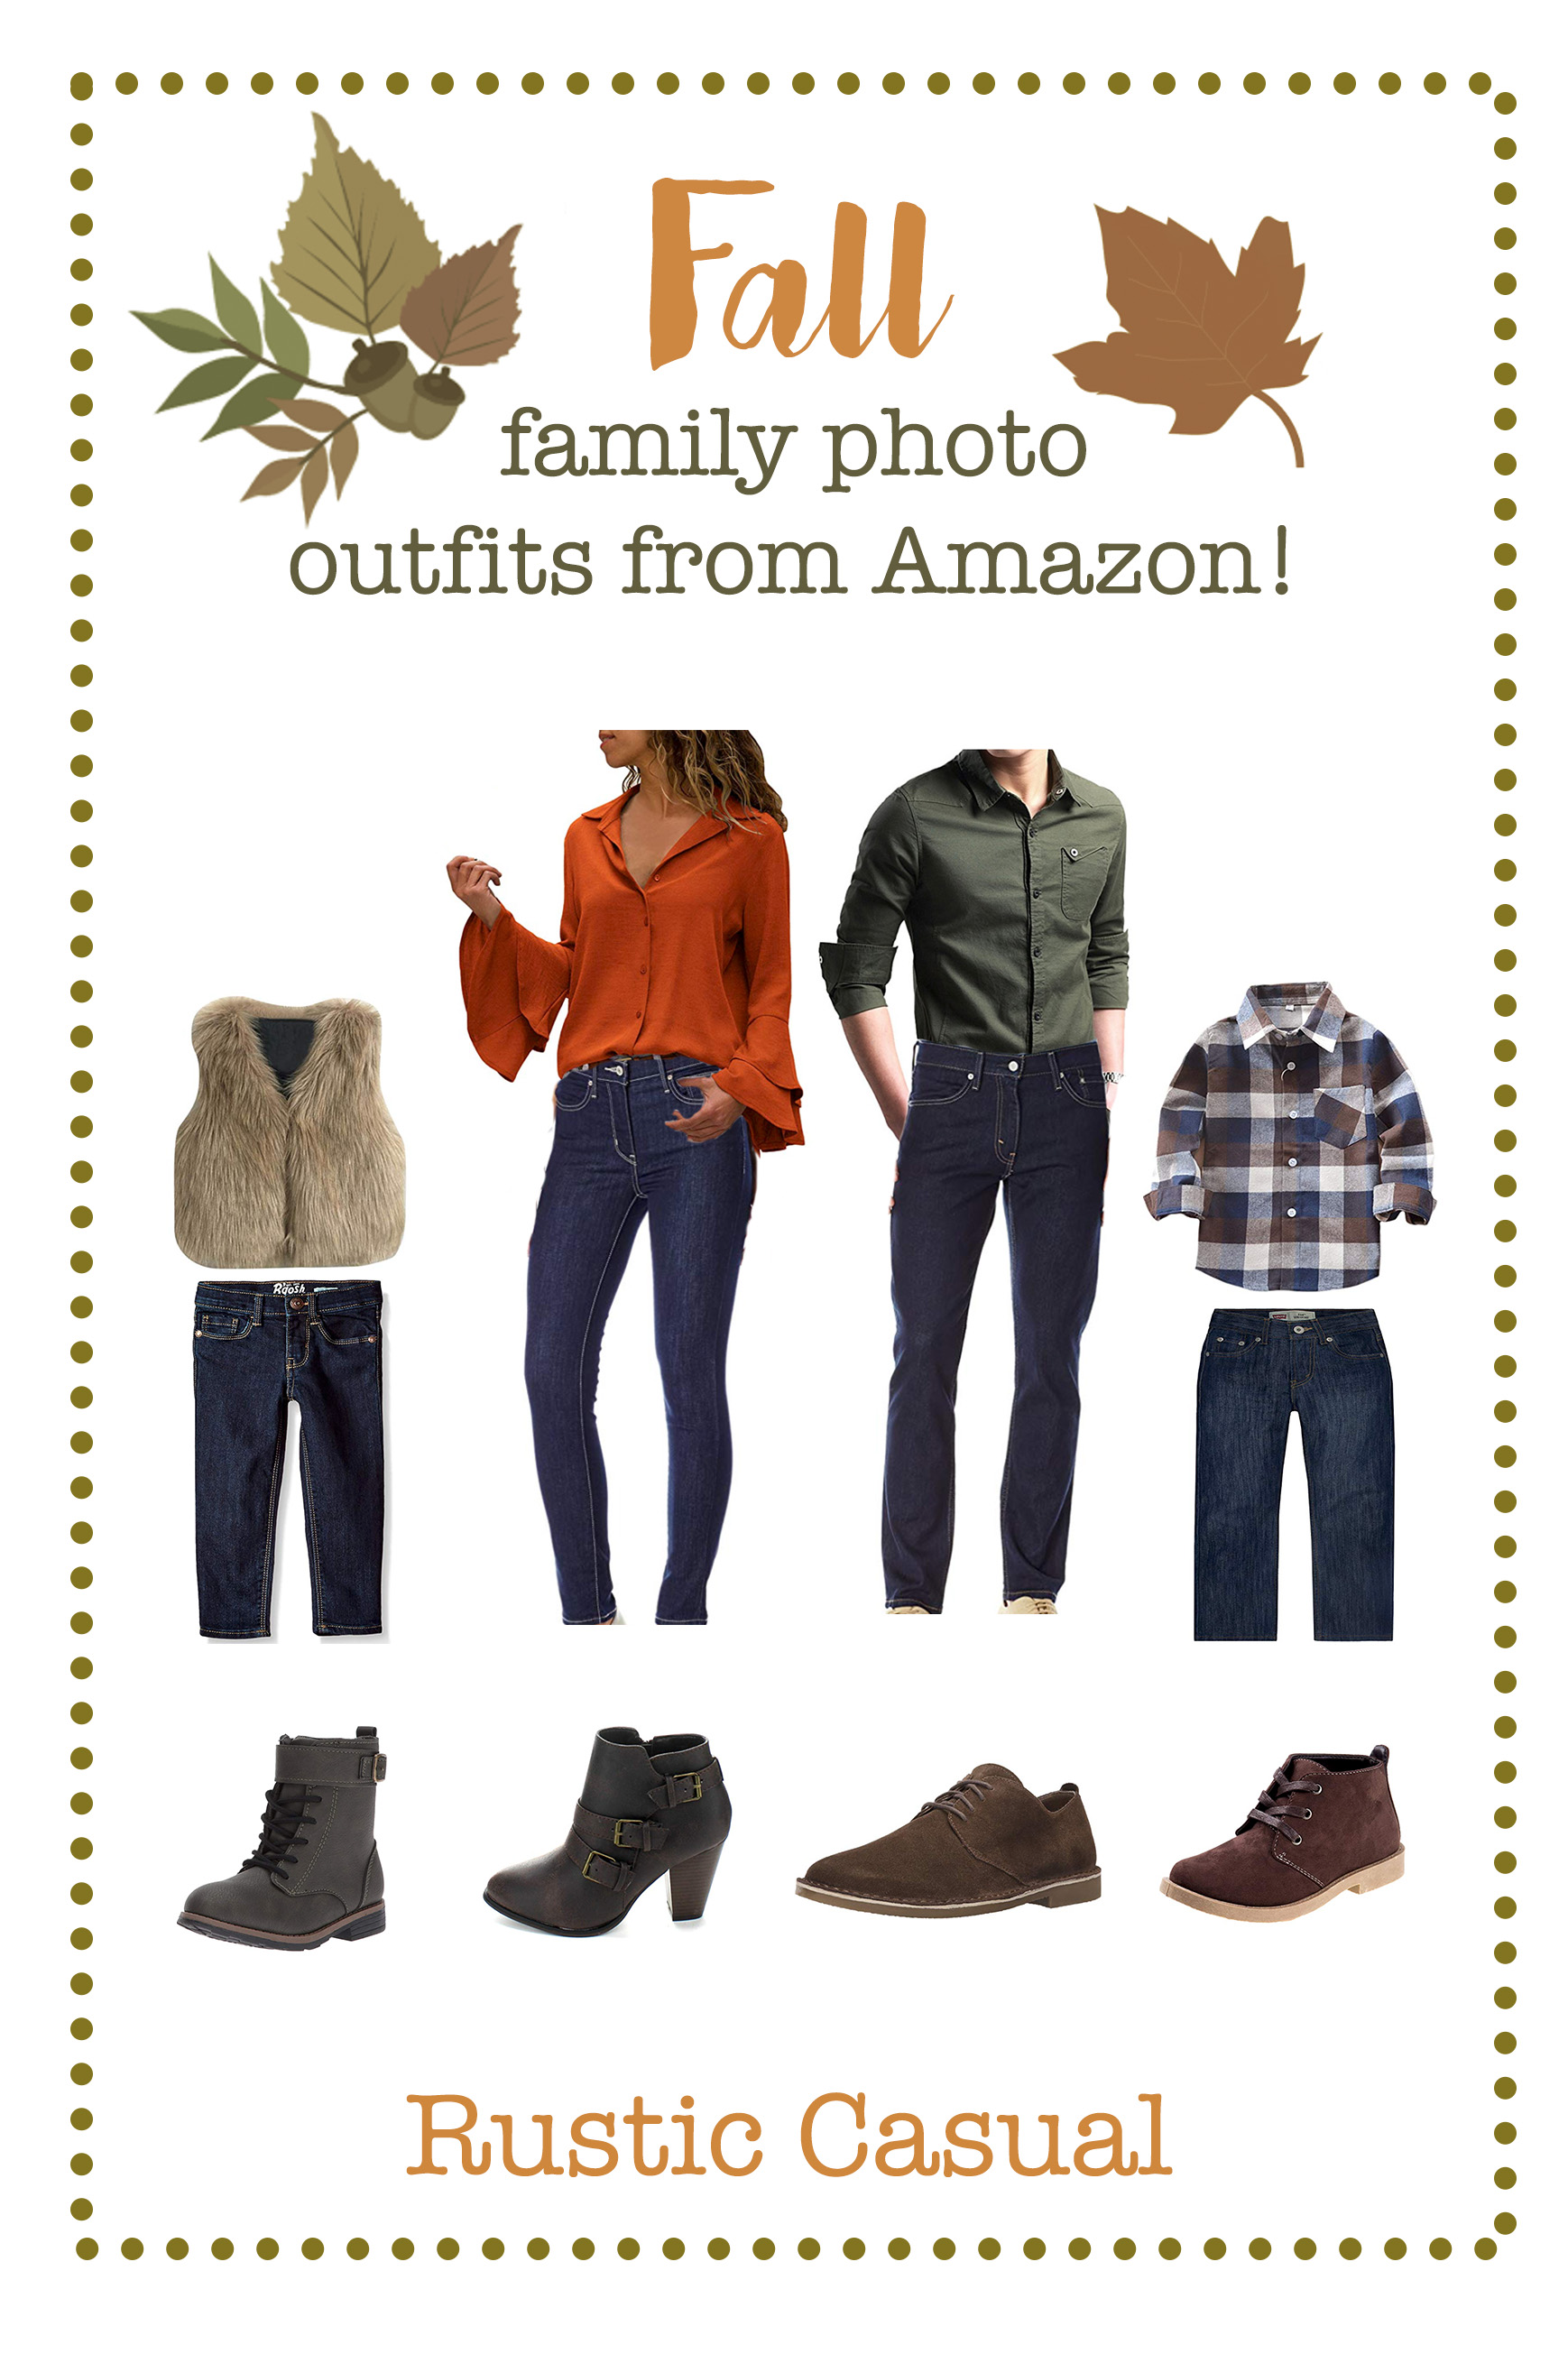 Fall family picture outfits from Amazon